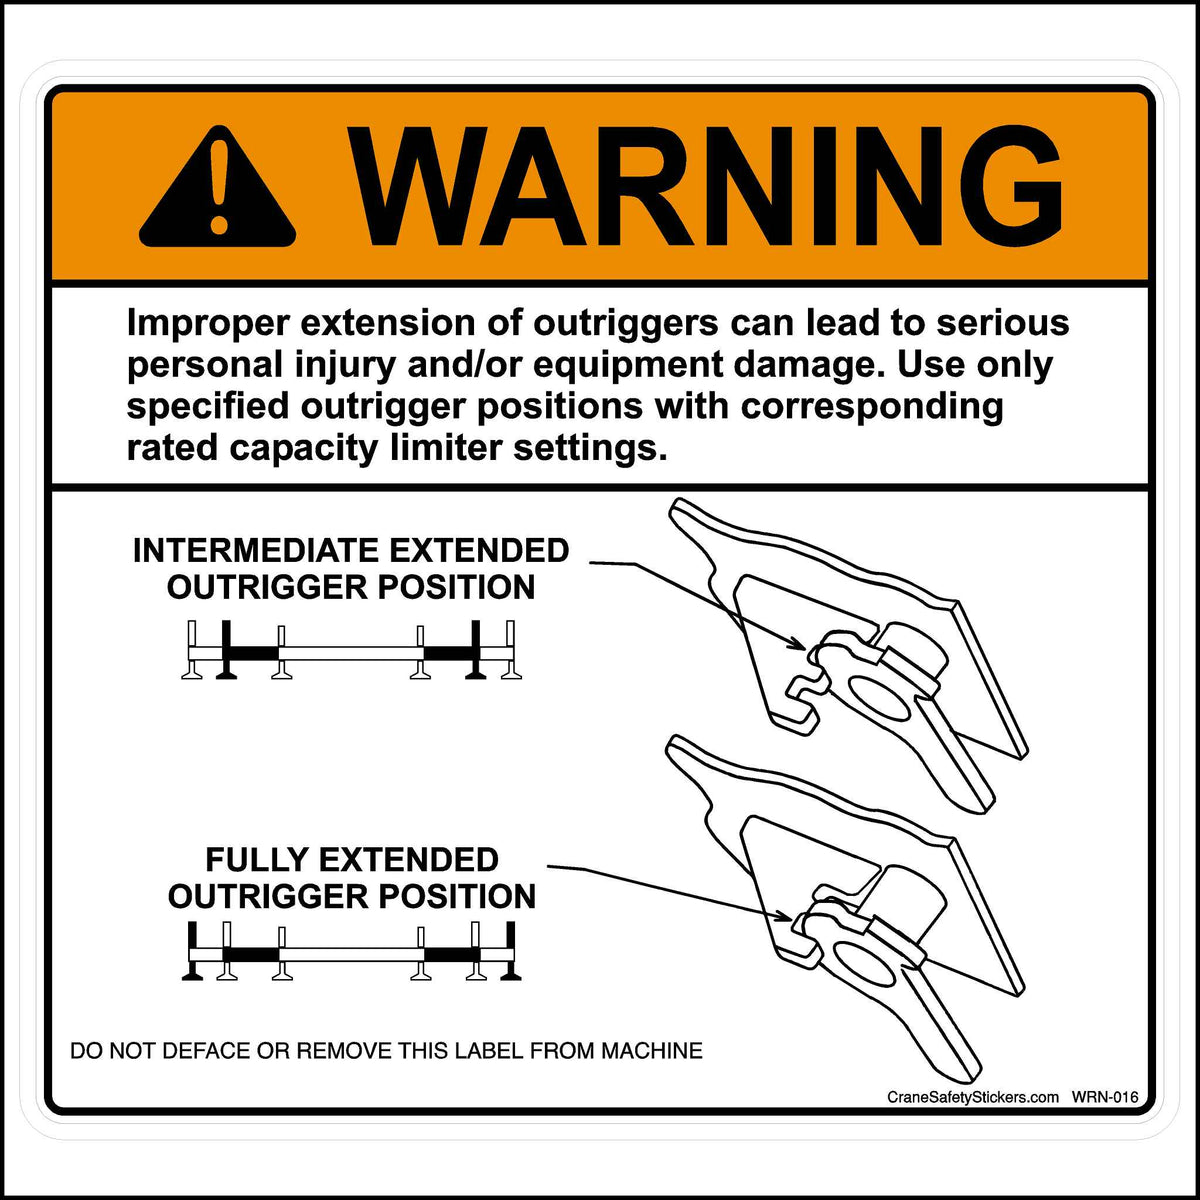 This Improper Extension of Outriggers Warning Sticker Is Printed With. Warning, Improper extension of outriggers can lead to serious personal injury and-or equipment damage. Use only specified outrigger positions with corresponding rated capacity limiter settings.